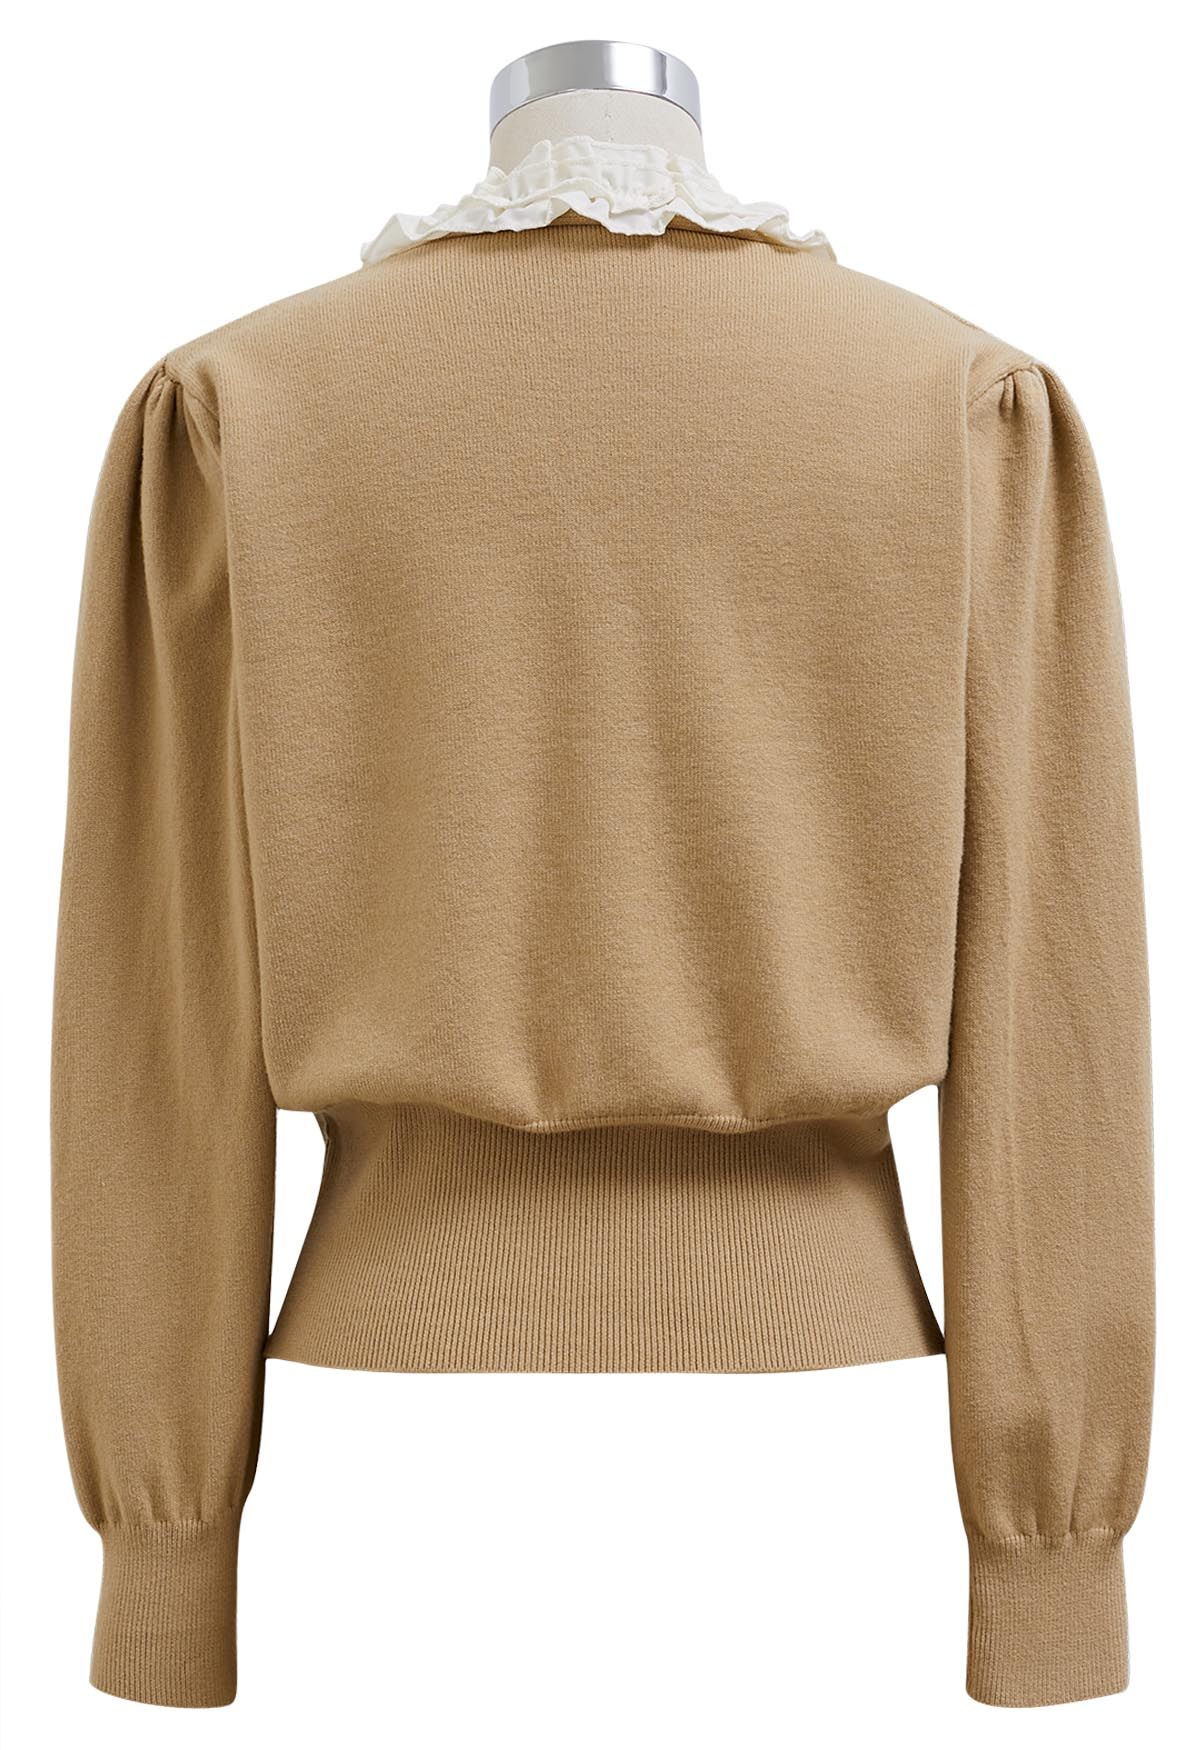 Ruffle Tie-Bow Wool-Blend Buttoned Top in Camel